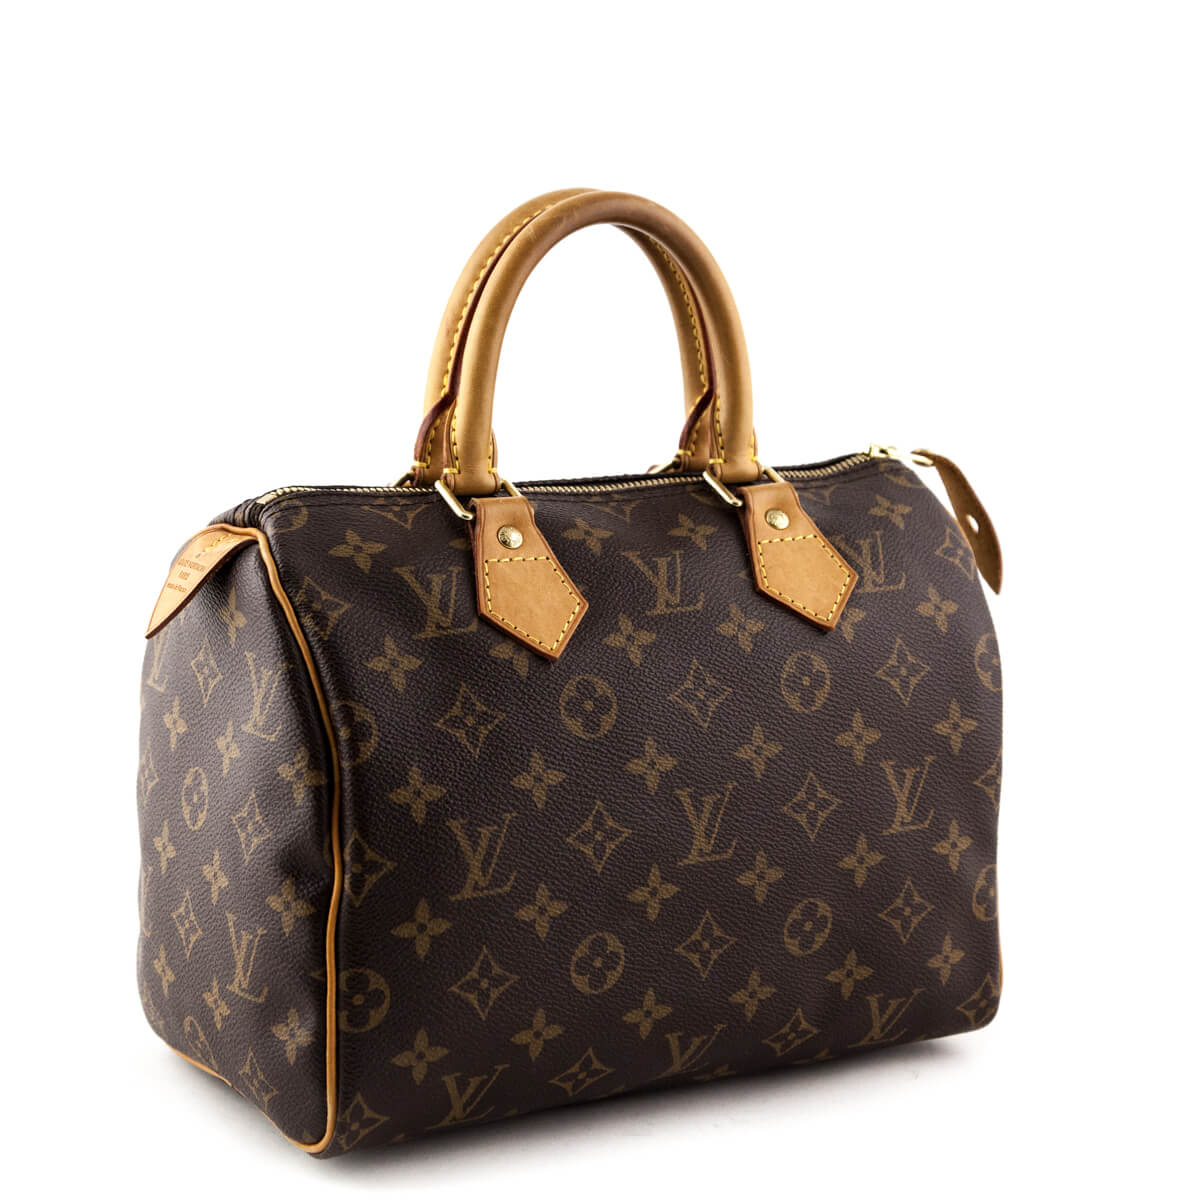 I'm “Bagging” You in 2023  Louis vuitton speedy 25, Audrey